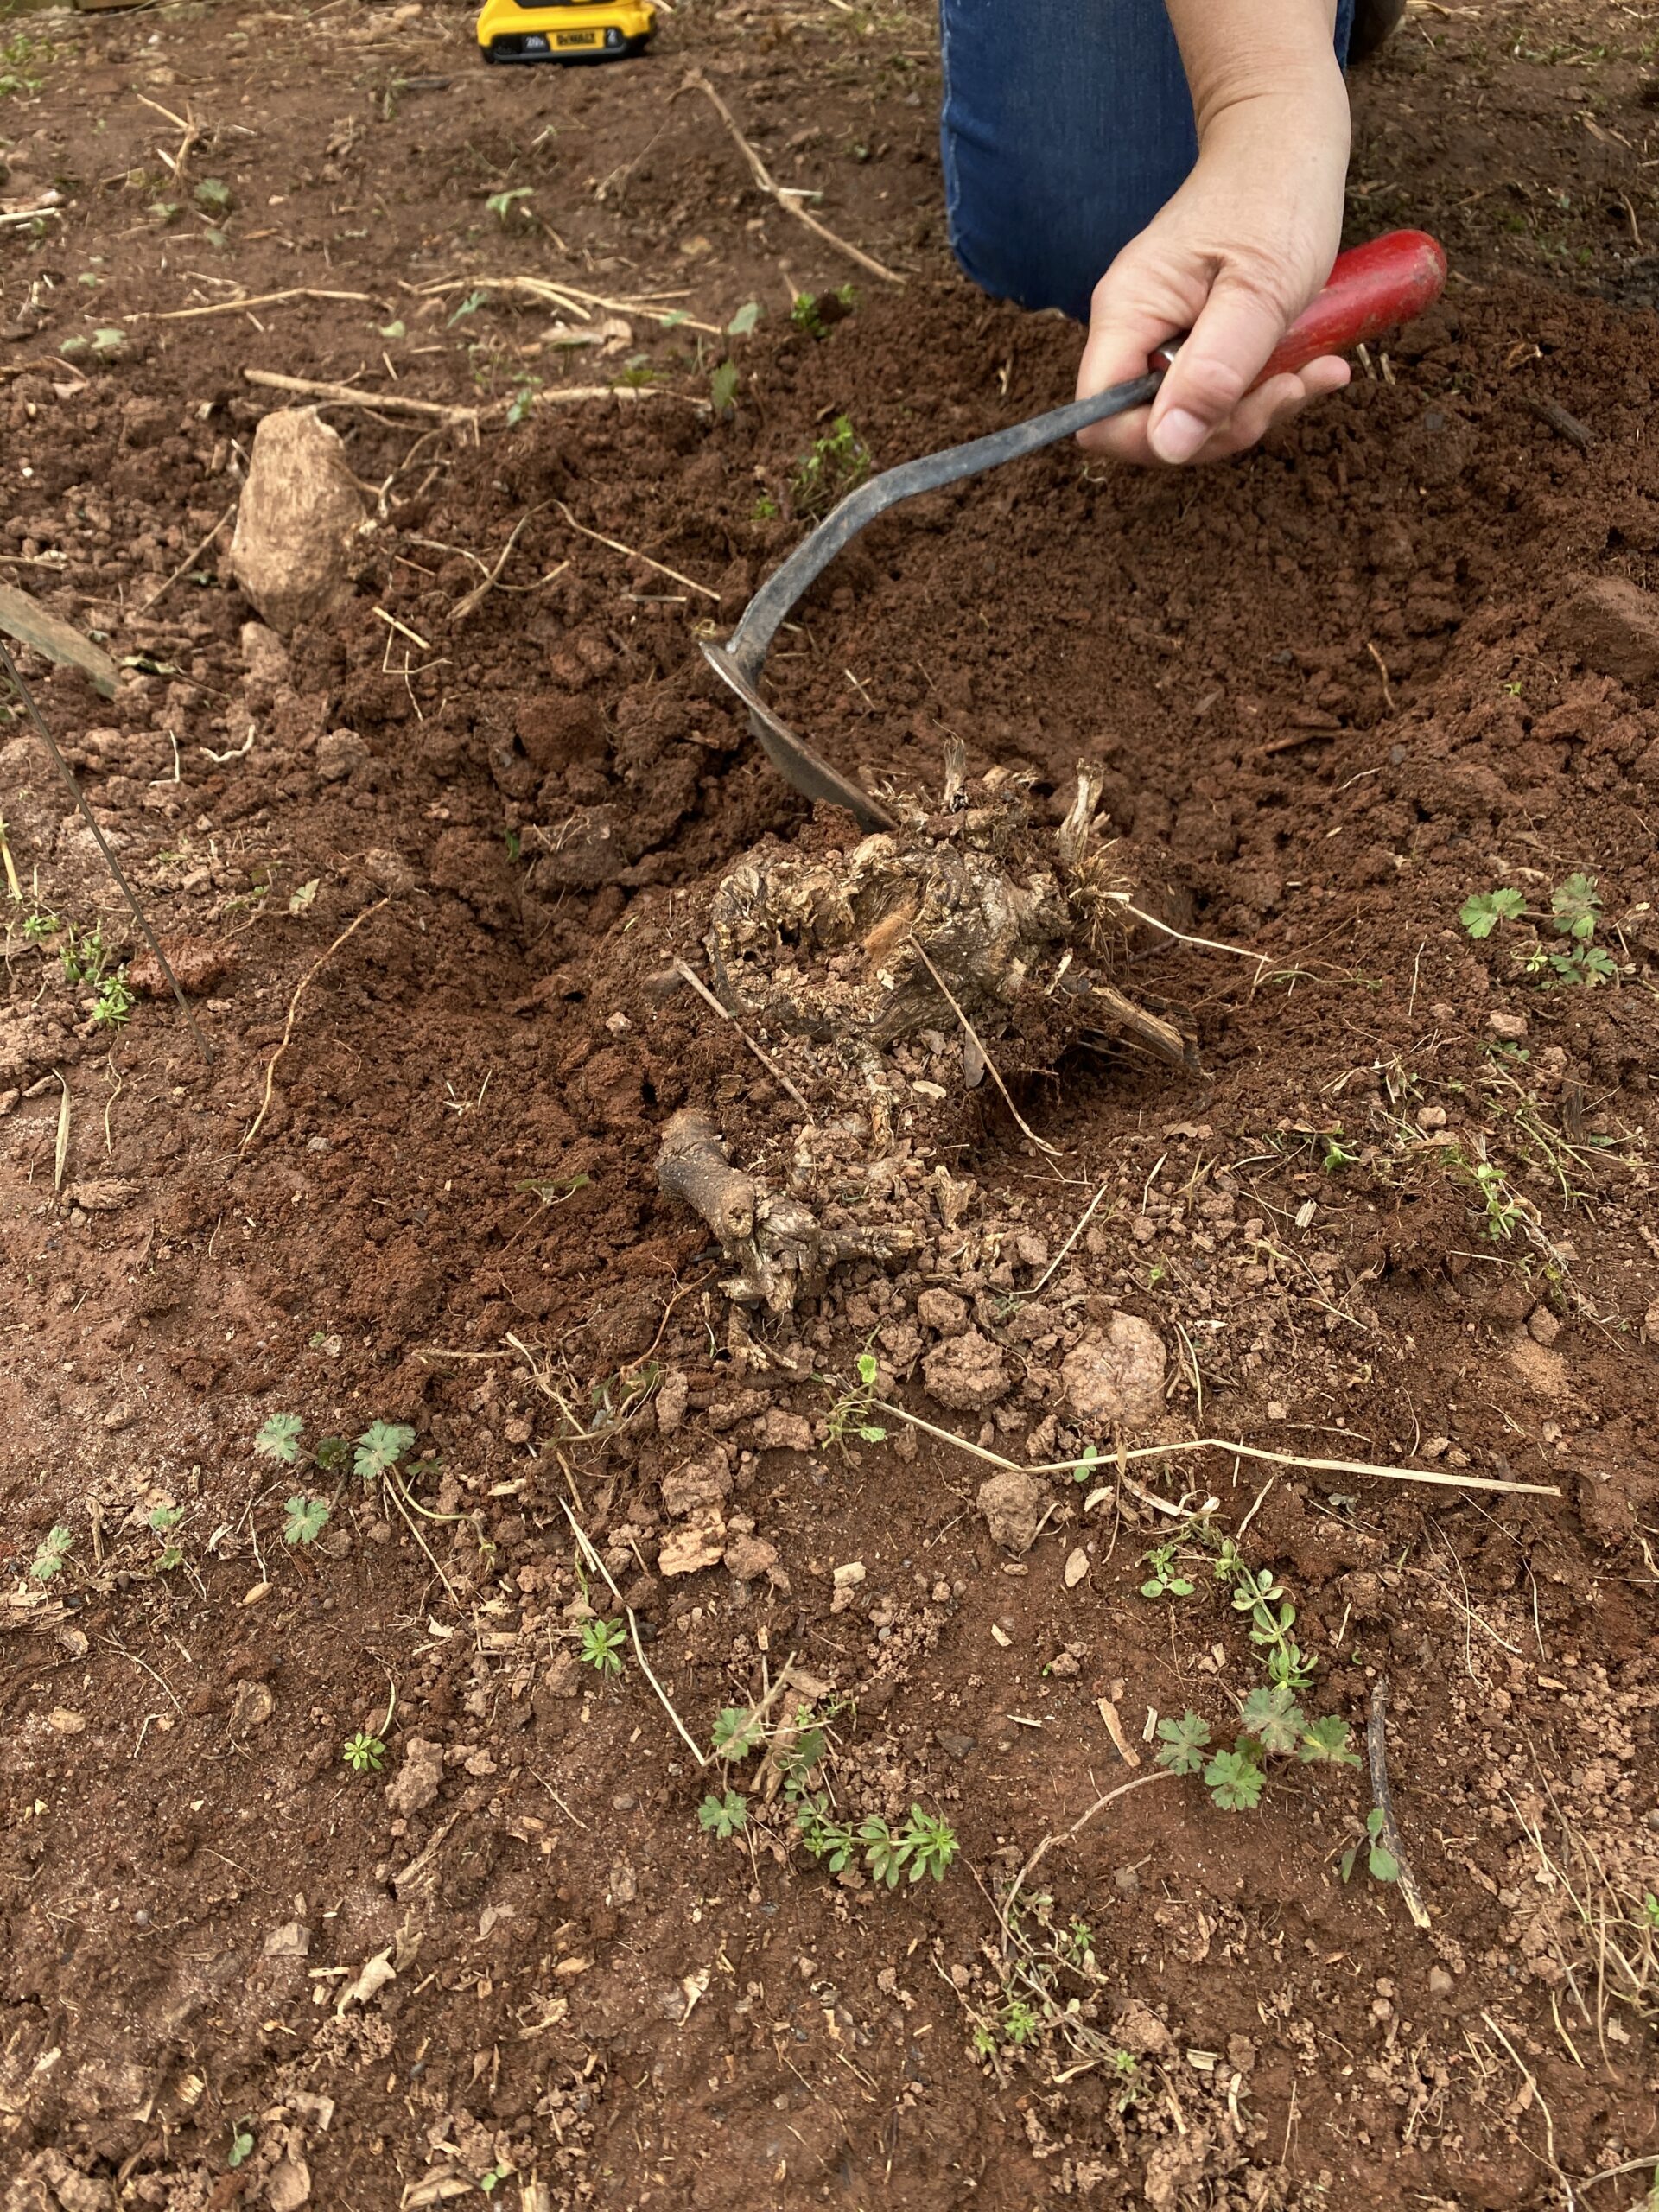 Unearthing the rootstock of the kudzu vine.